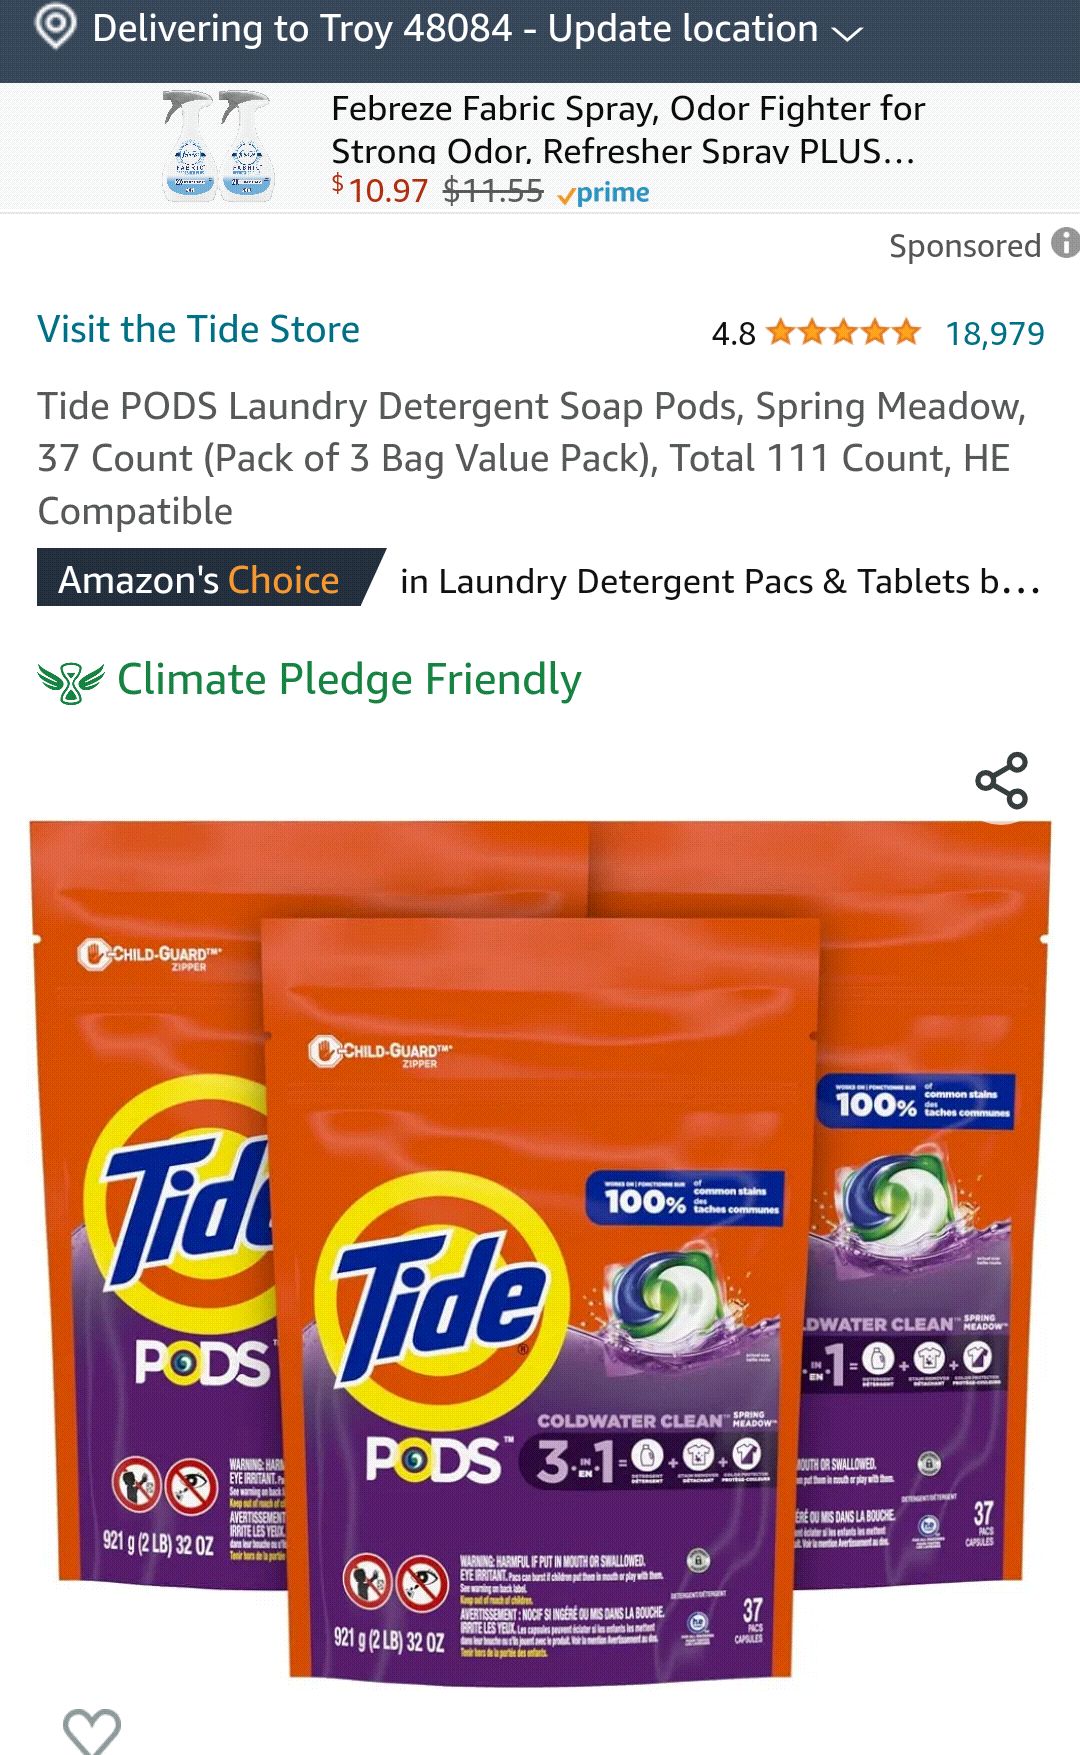 Tide PODS Laundry Detergent Soap Pods, Spring Meadow, 37 Count (Pack of 3 Bag Value Pack), Total 111 Count 汰渍洗衣球111颗